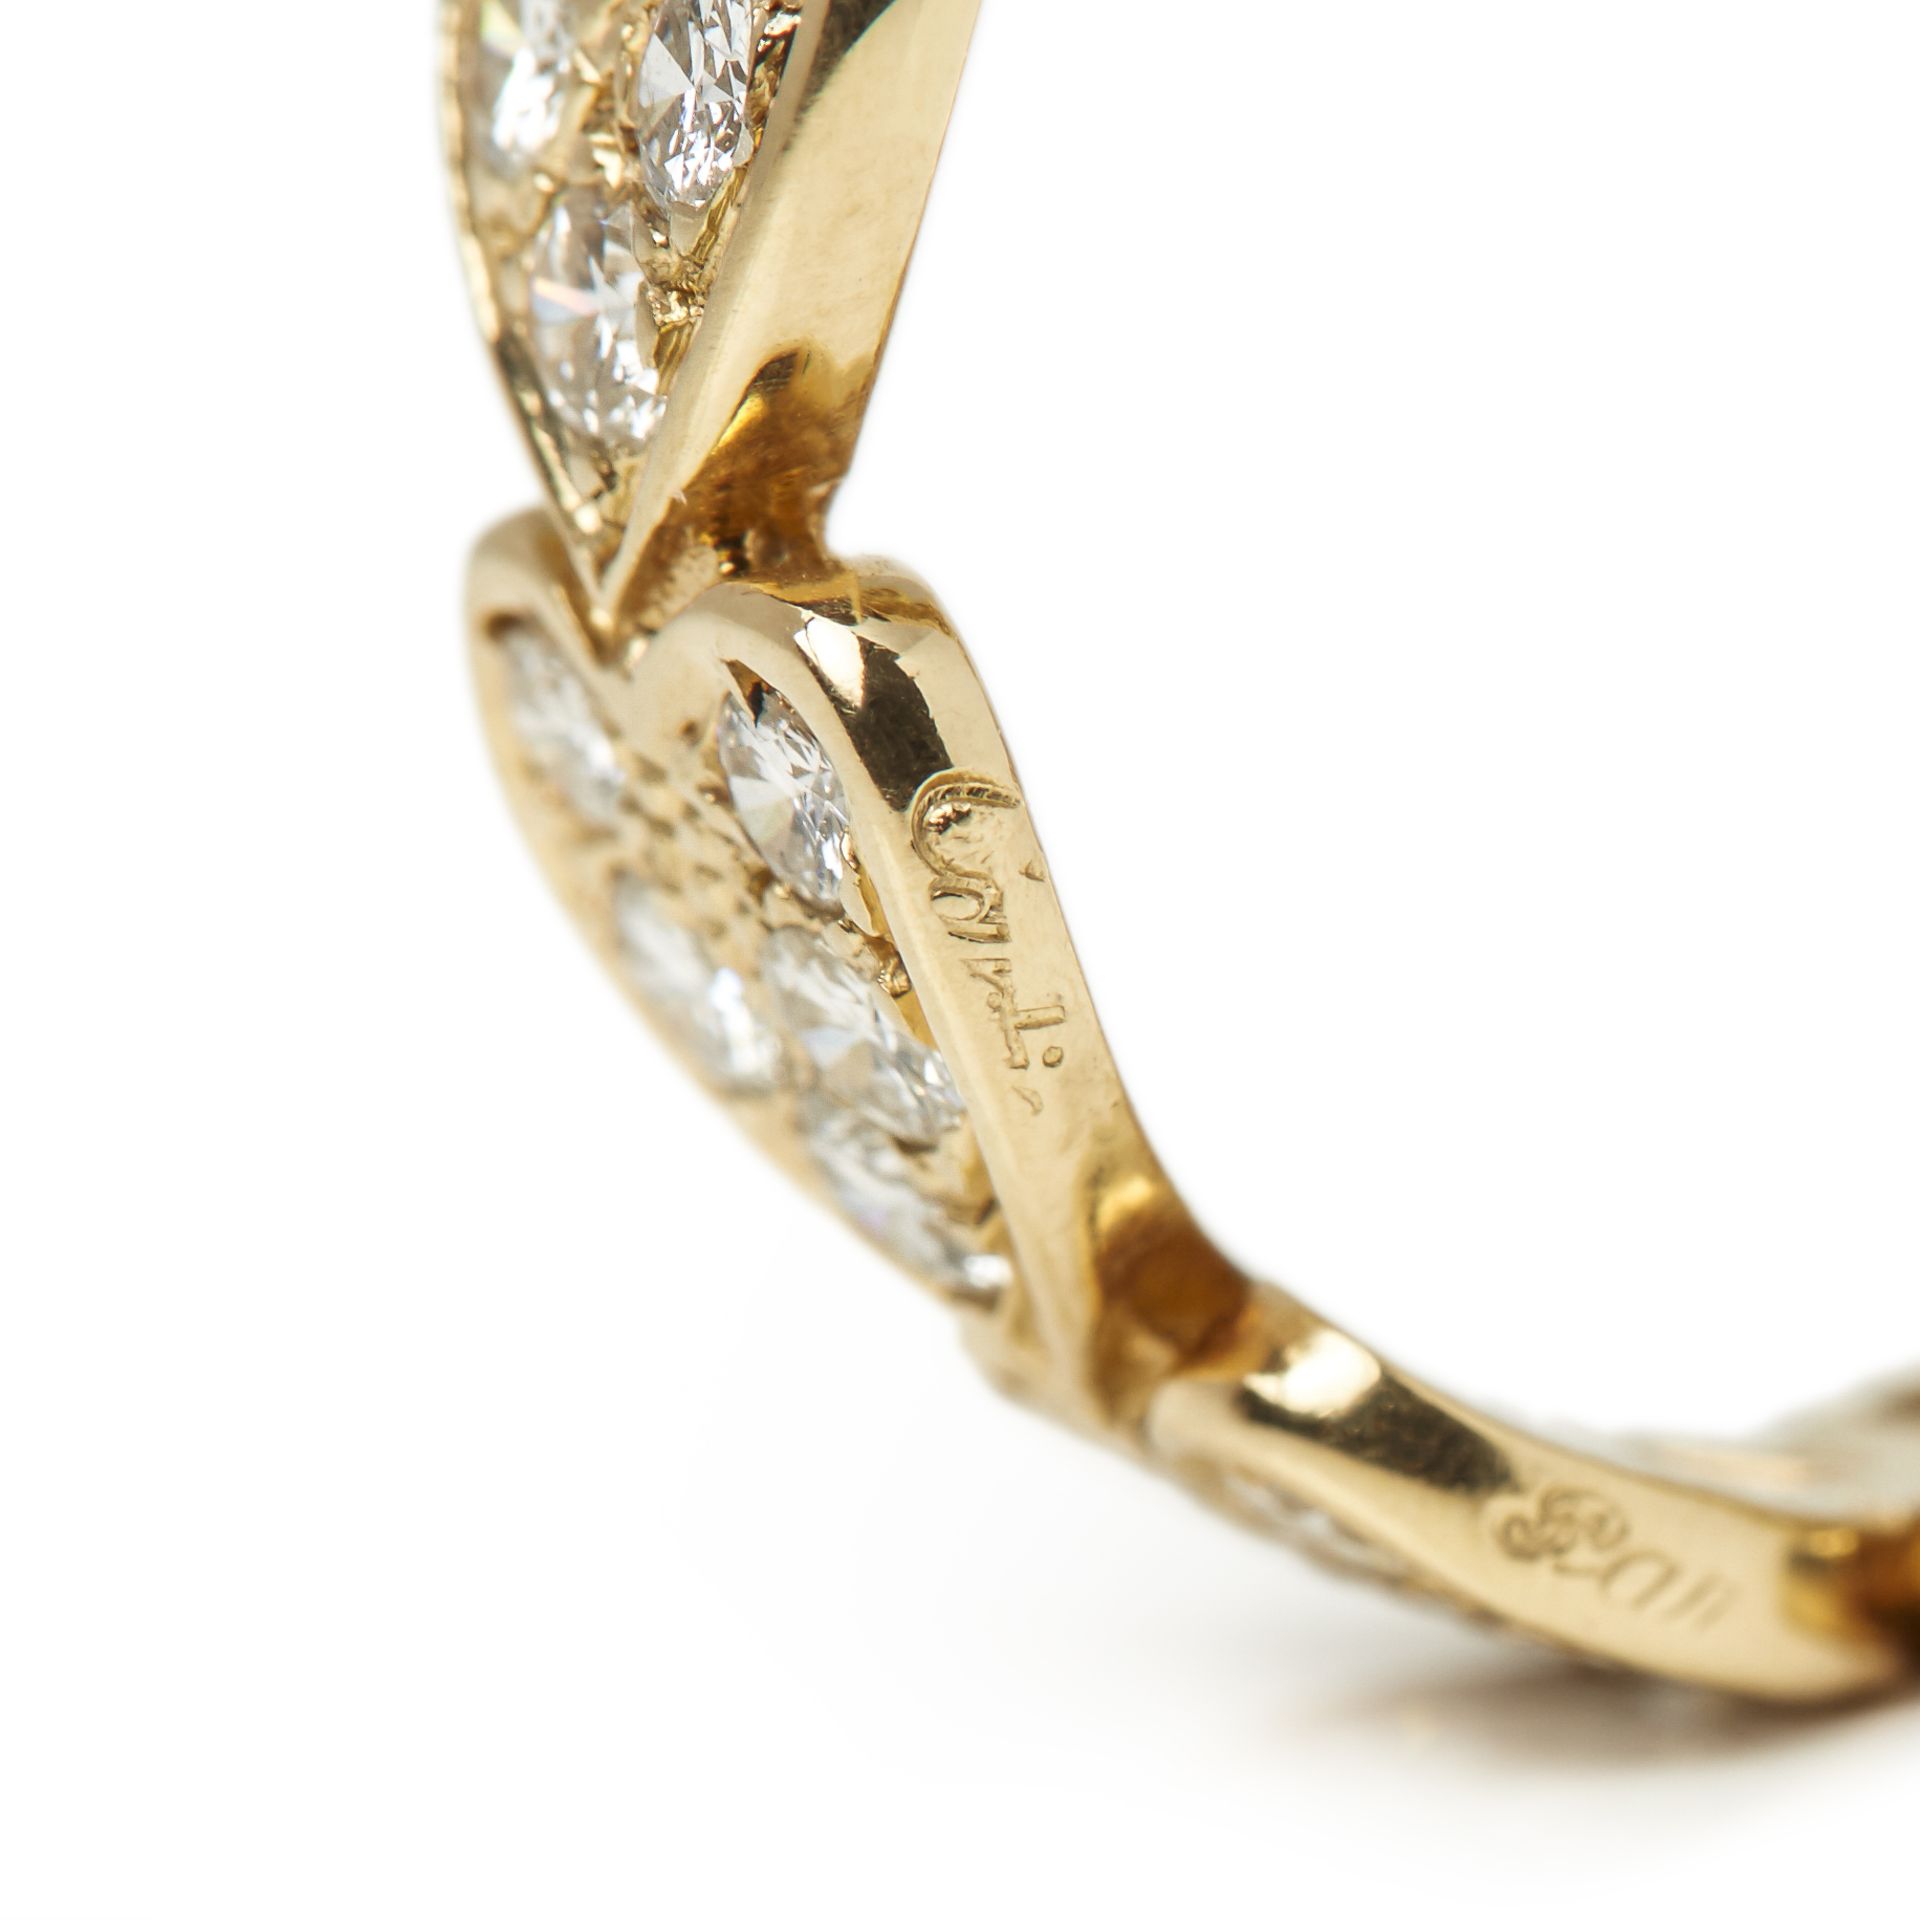 Cartier 18k Yellow Gold Diamond Heart Ring - Image 15 of 23